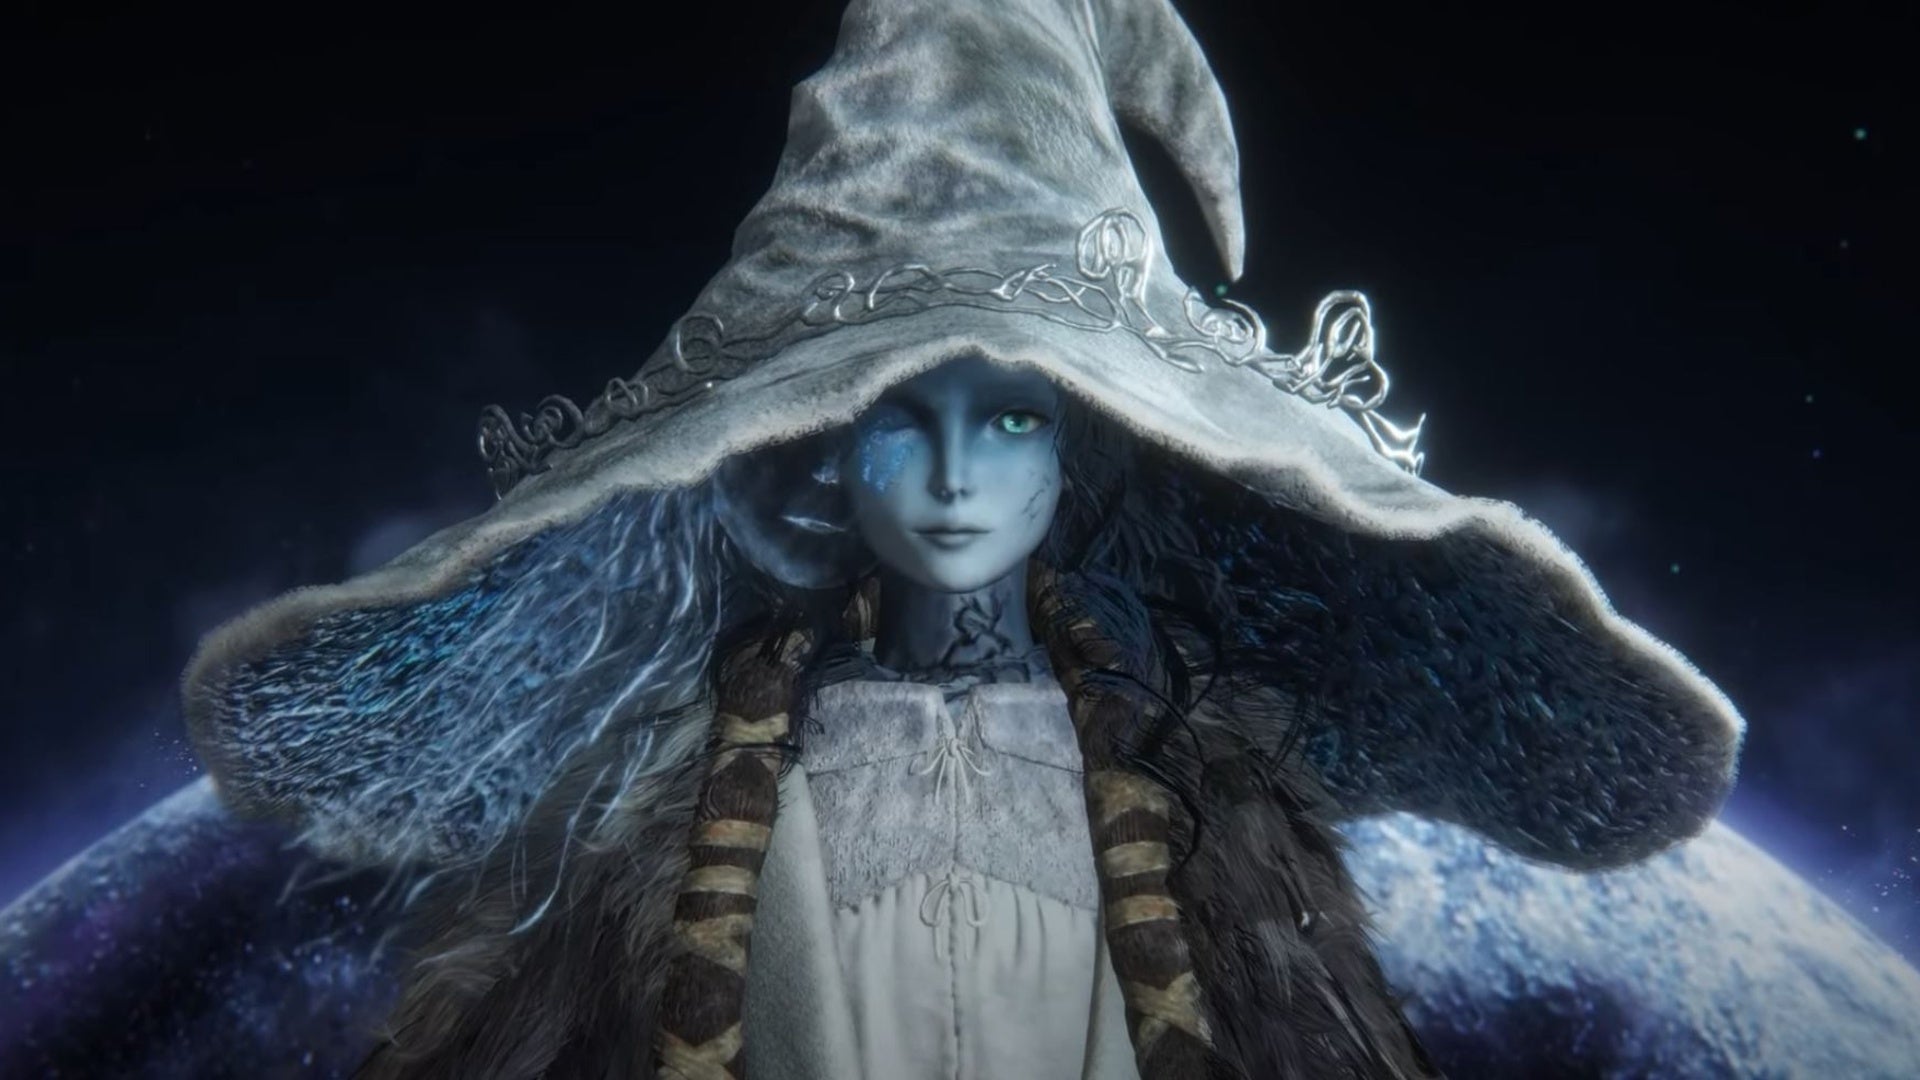 Ranni the Witch is an NPC in FromSoftware's action RPG Elden Ring